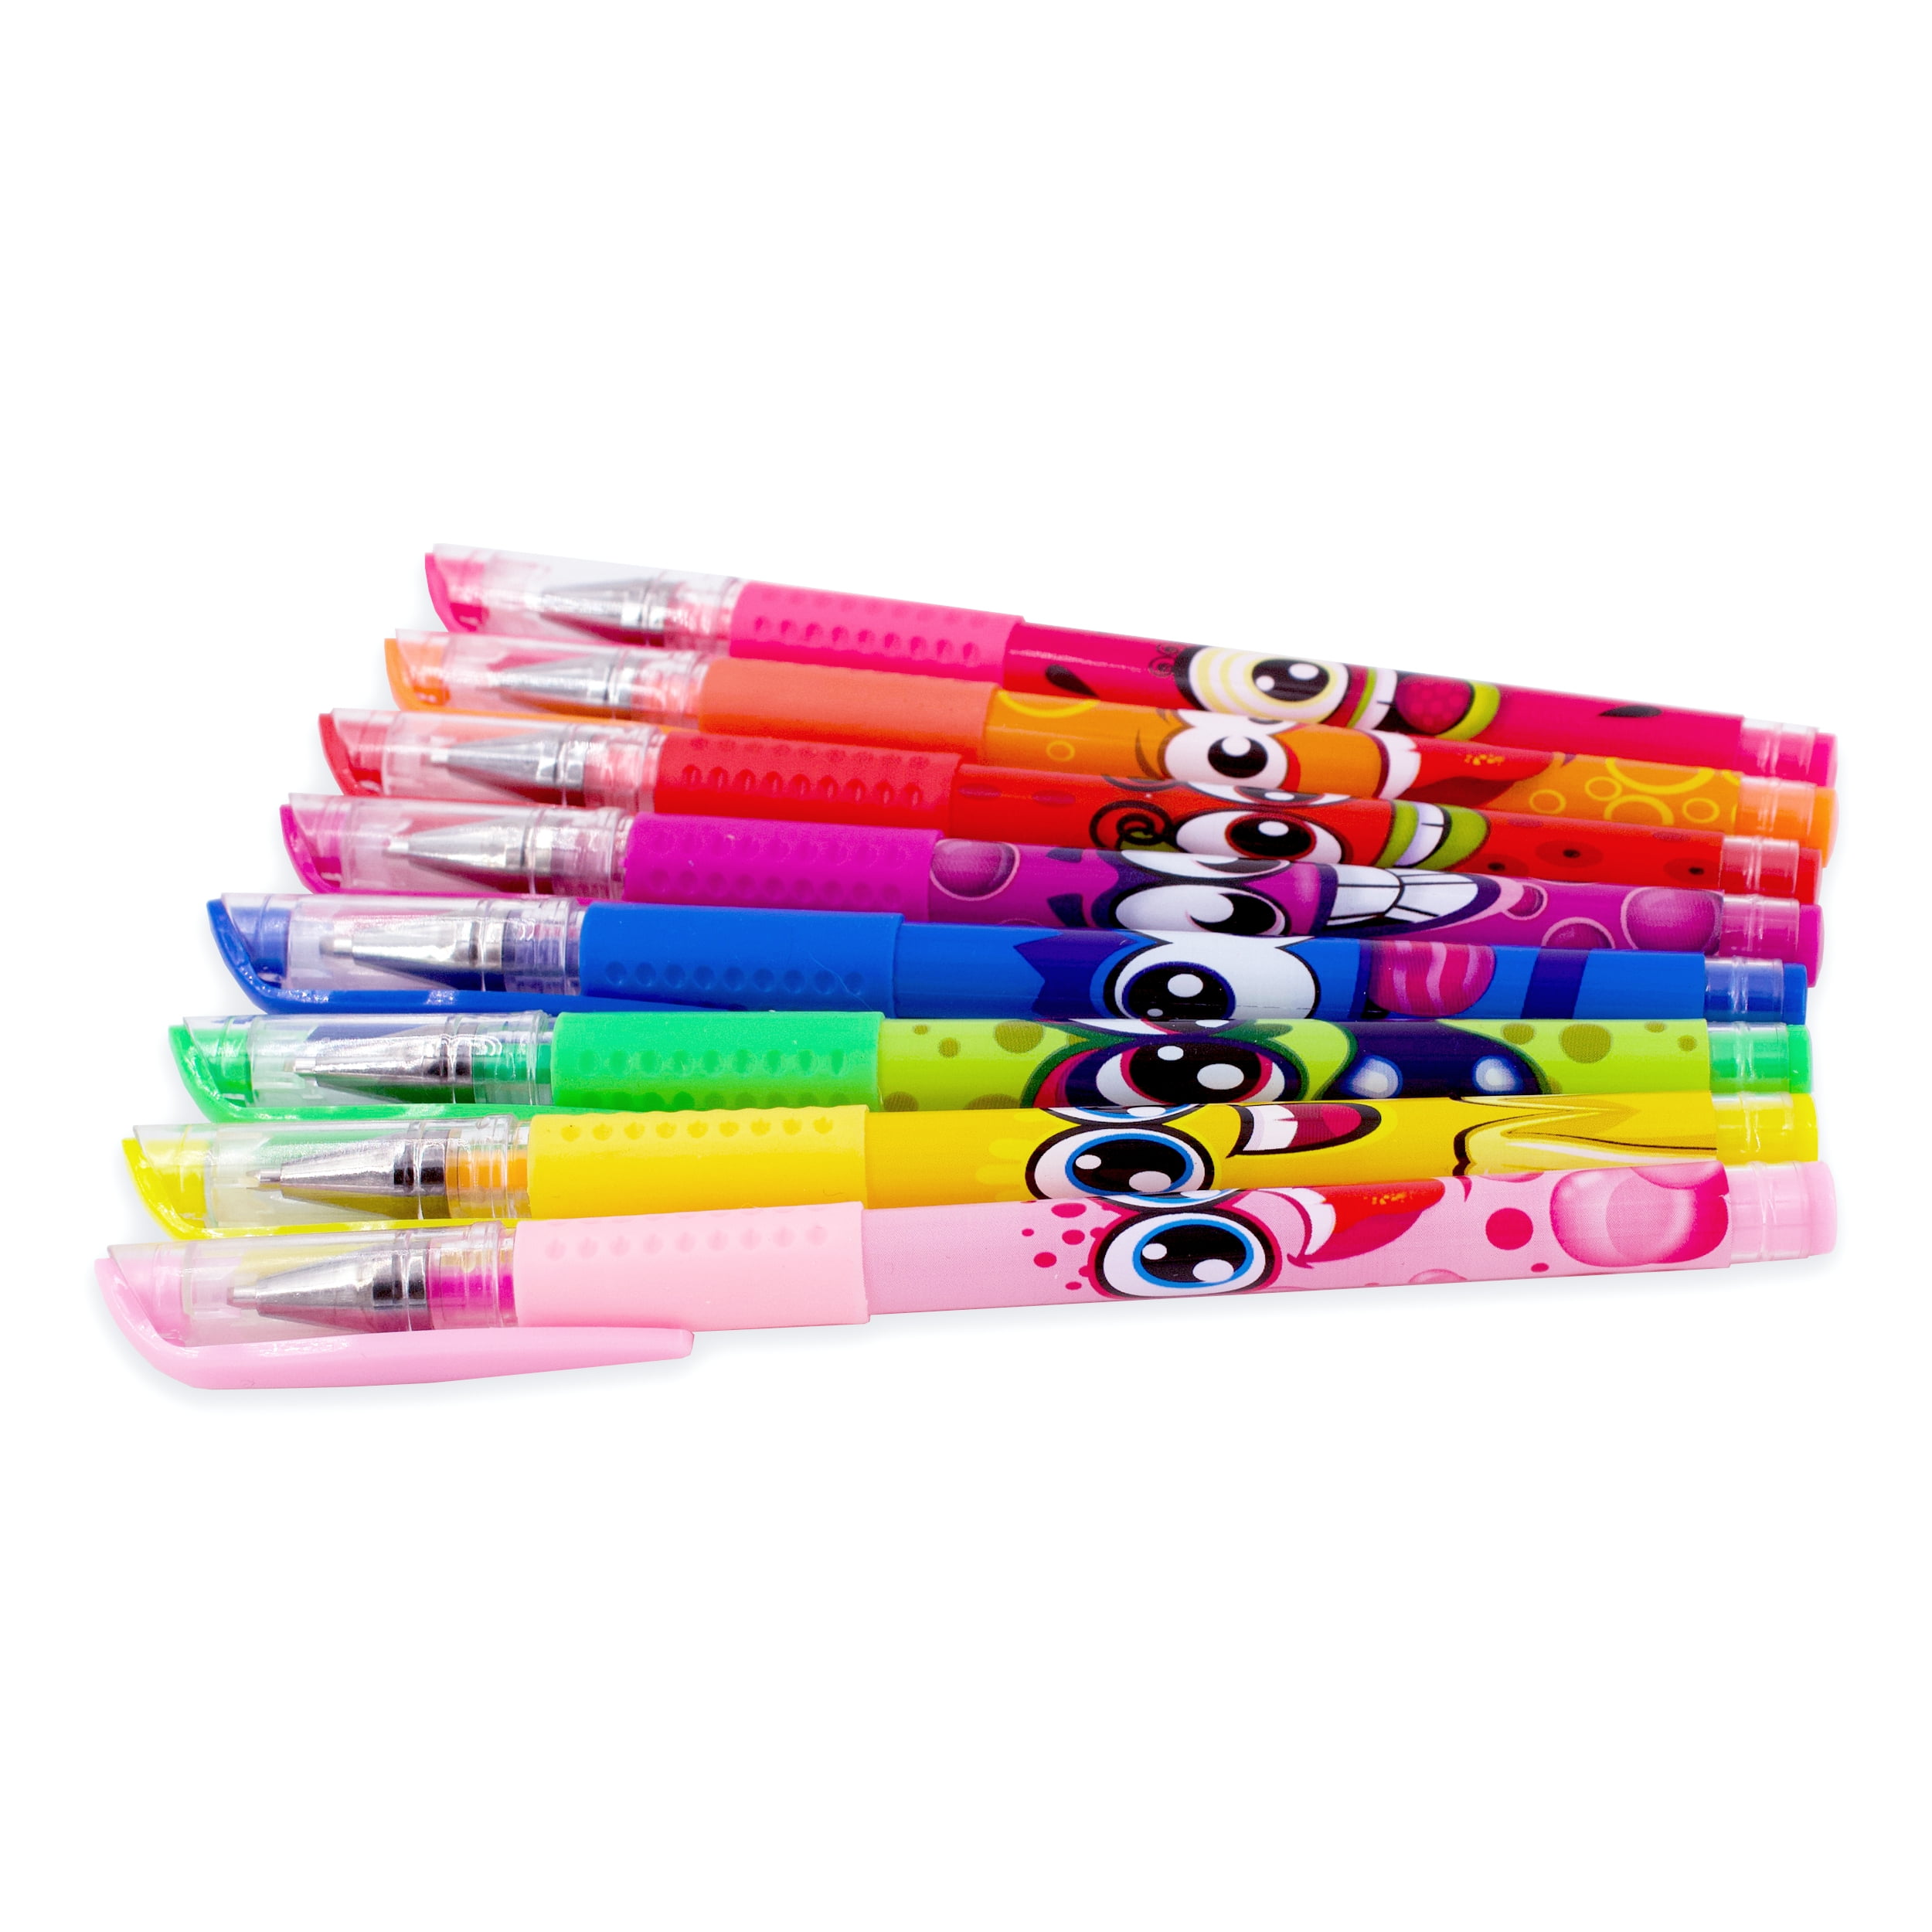  Scentos Scented Gel Pens for Kids - Assorted Colorful Pens -  Fine Point Gel Pen Set - For Ages 3 and Up - 24 Count : Office Products